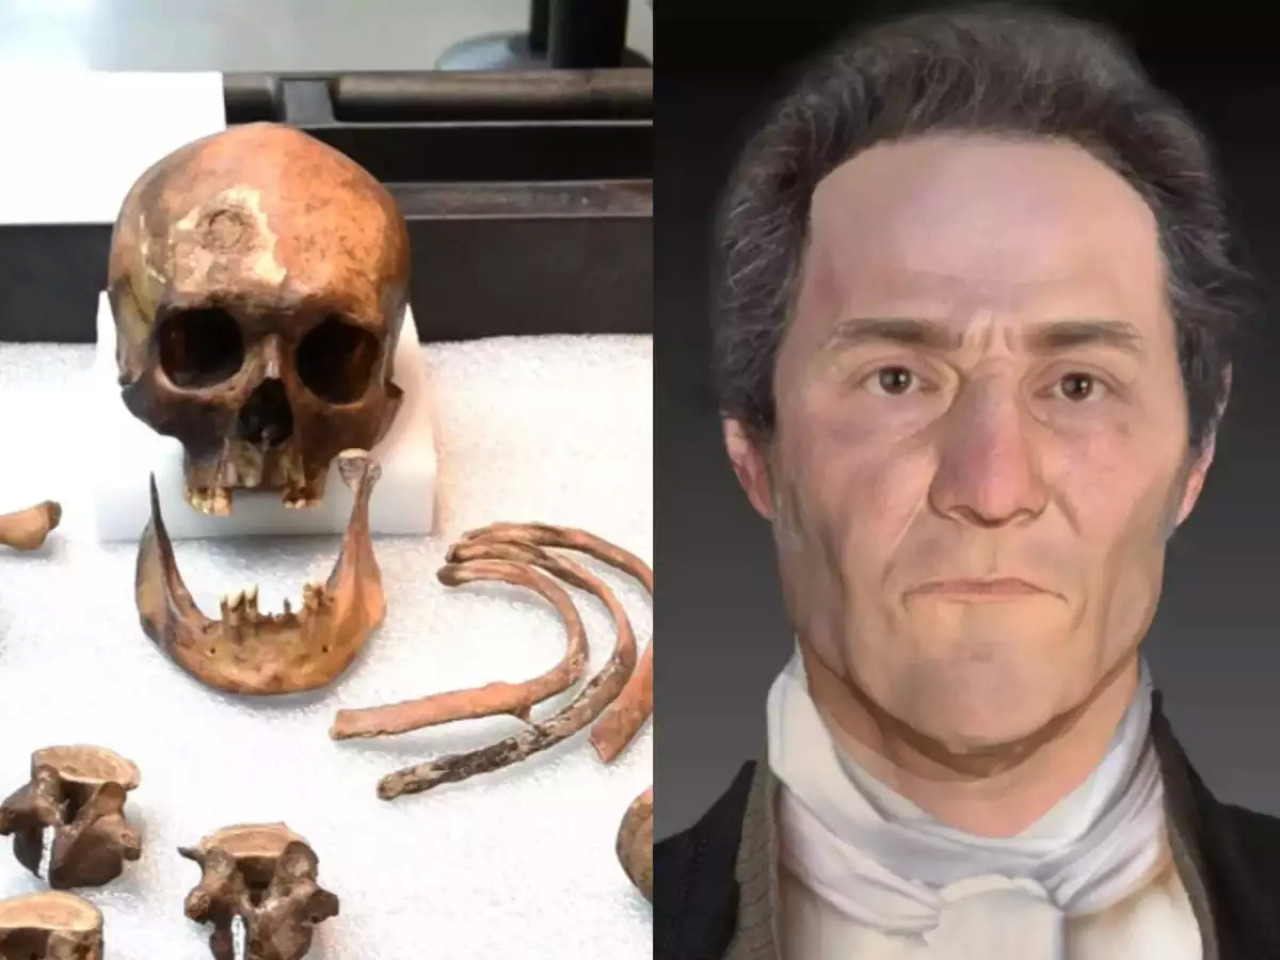 [IMAGE] Mystery surrounds 19th century 'vampire' found buried in New England with his thigh bones crossed over his che